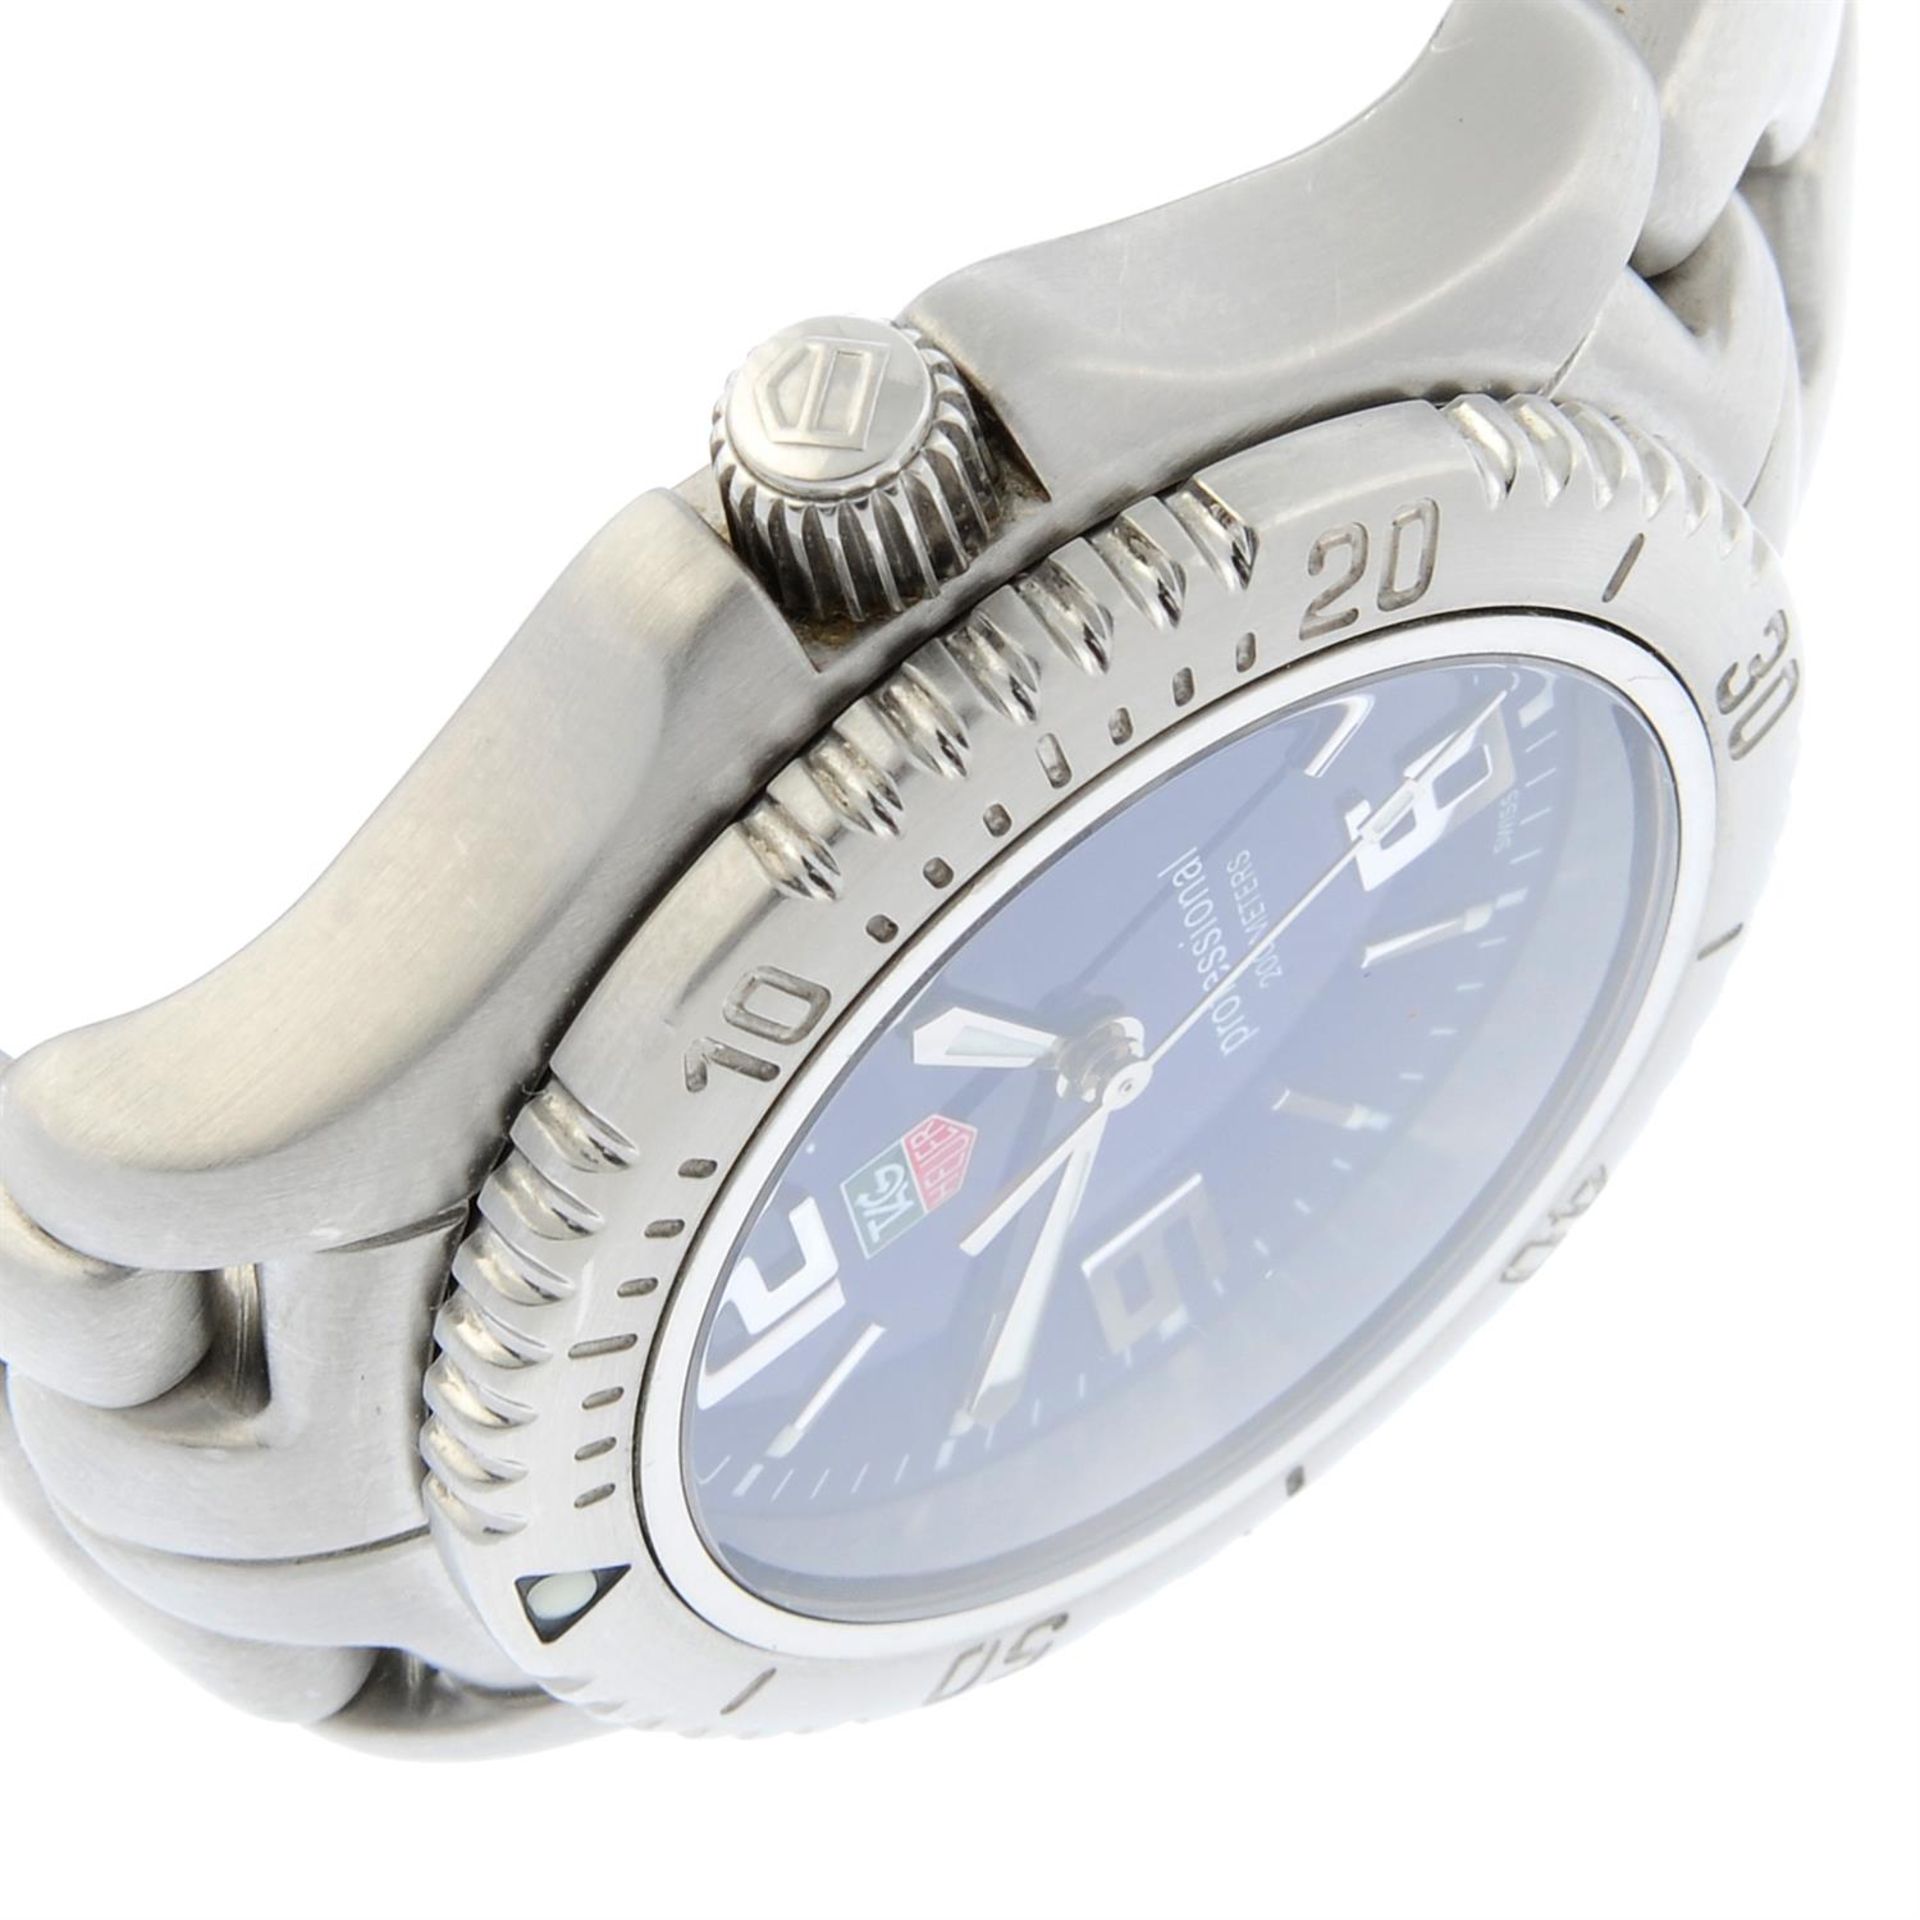 TAG HEUER - a stainless steel Link bracelet watch, 36mm. - Image 3 of 4